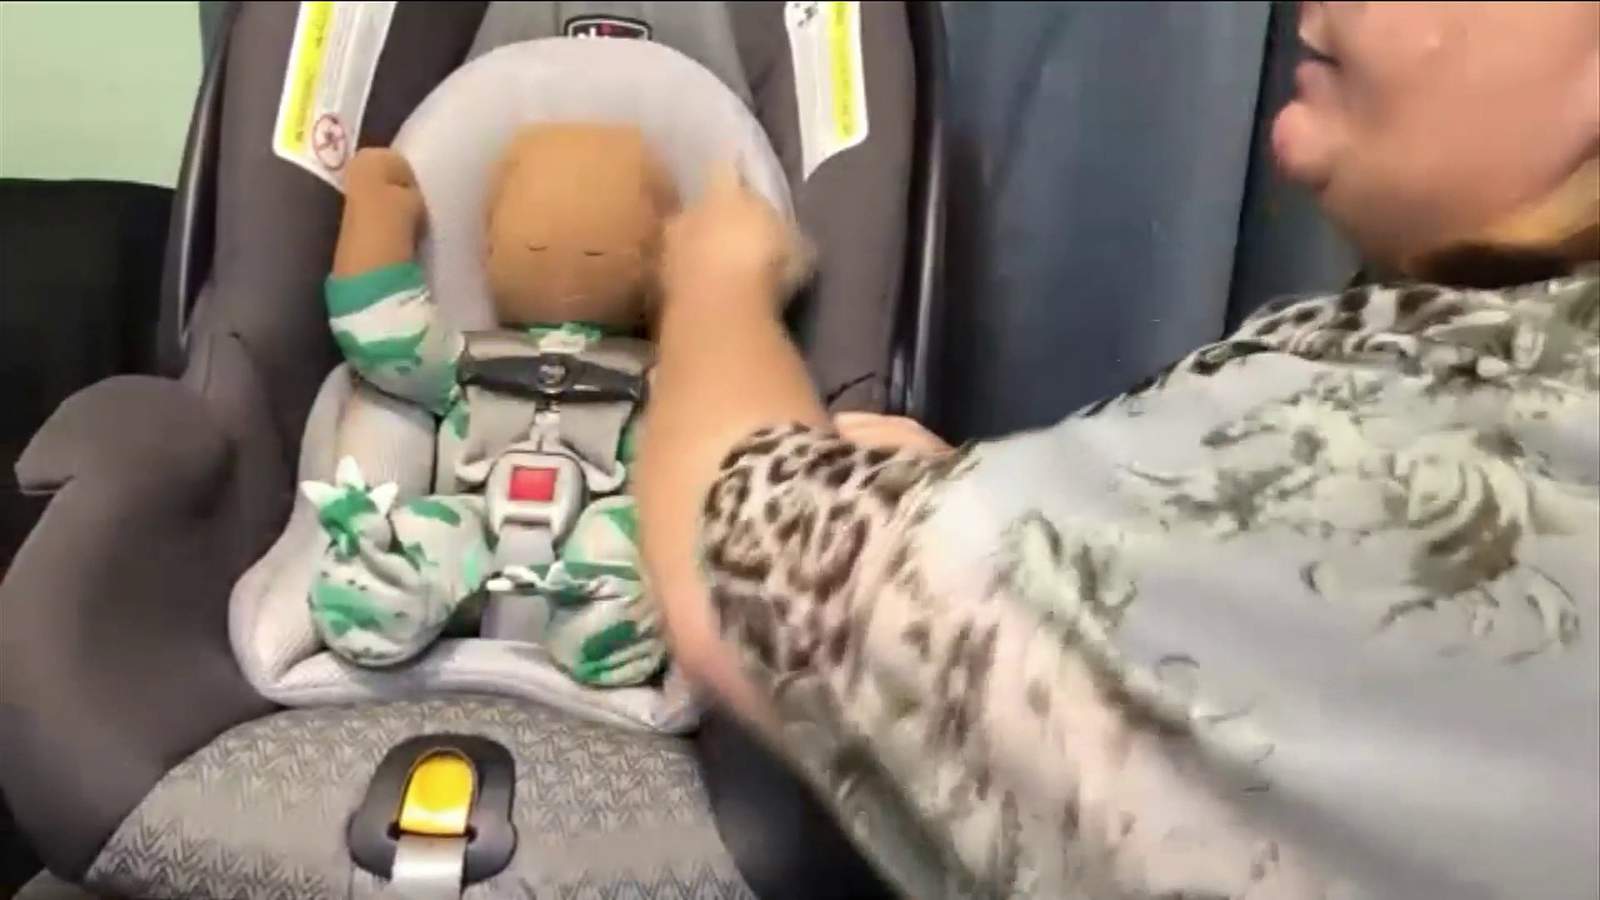 Chances are your child’s car seat is not installed properly